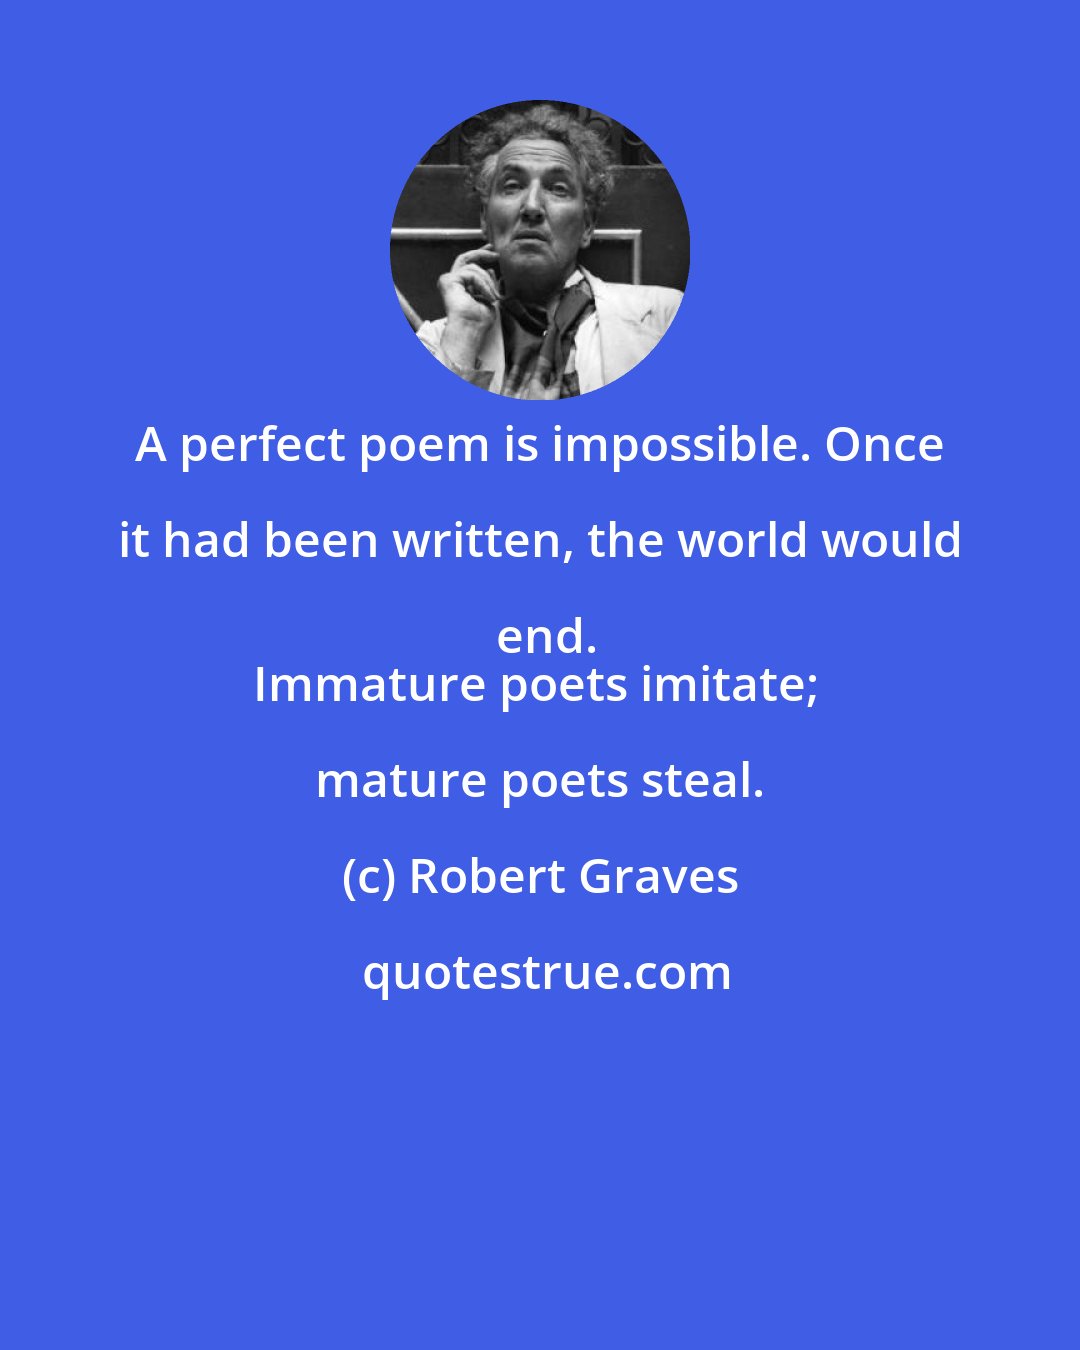 Robert Graves: A perfect poem is impossible. Once it had been written, the world would end.
Immature poets imitate; mature poets steal.